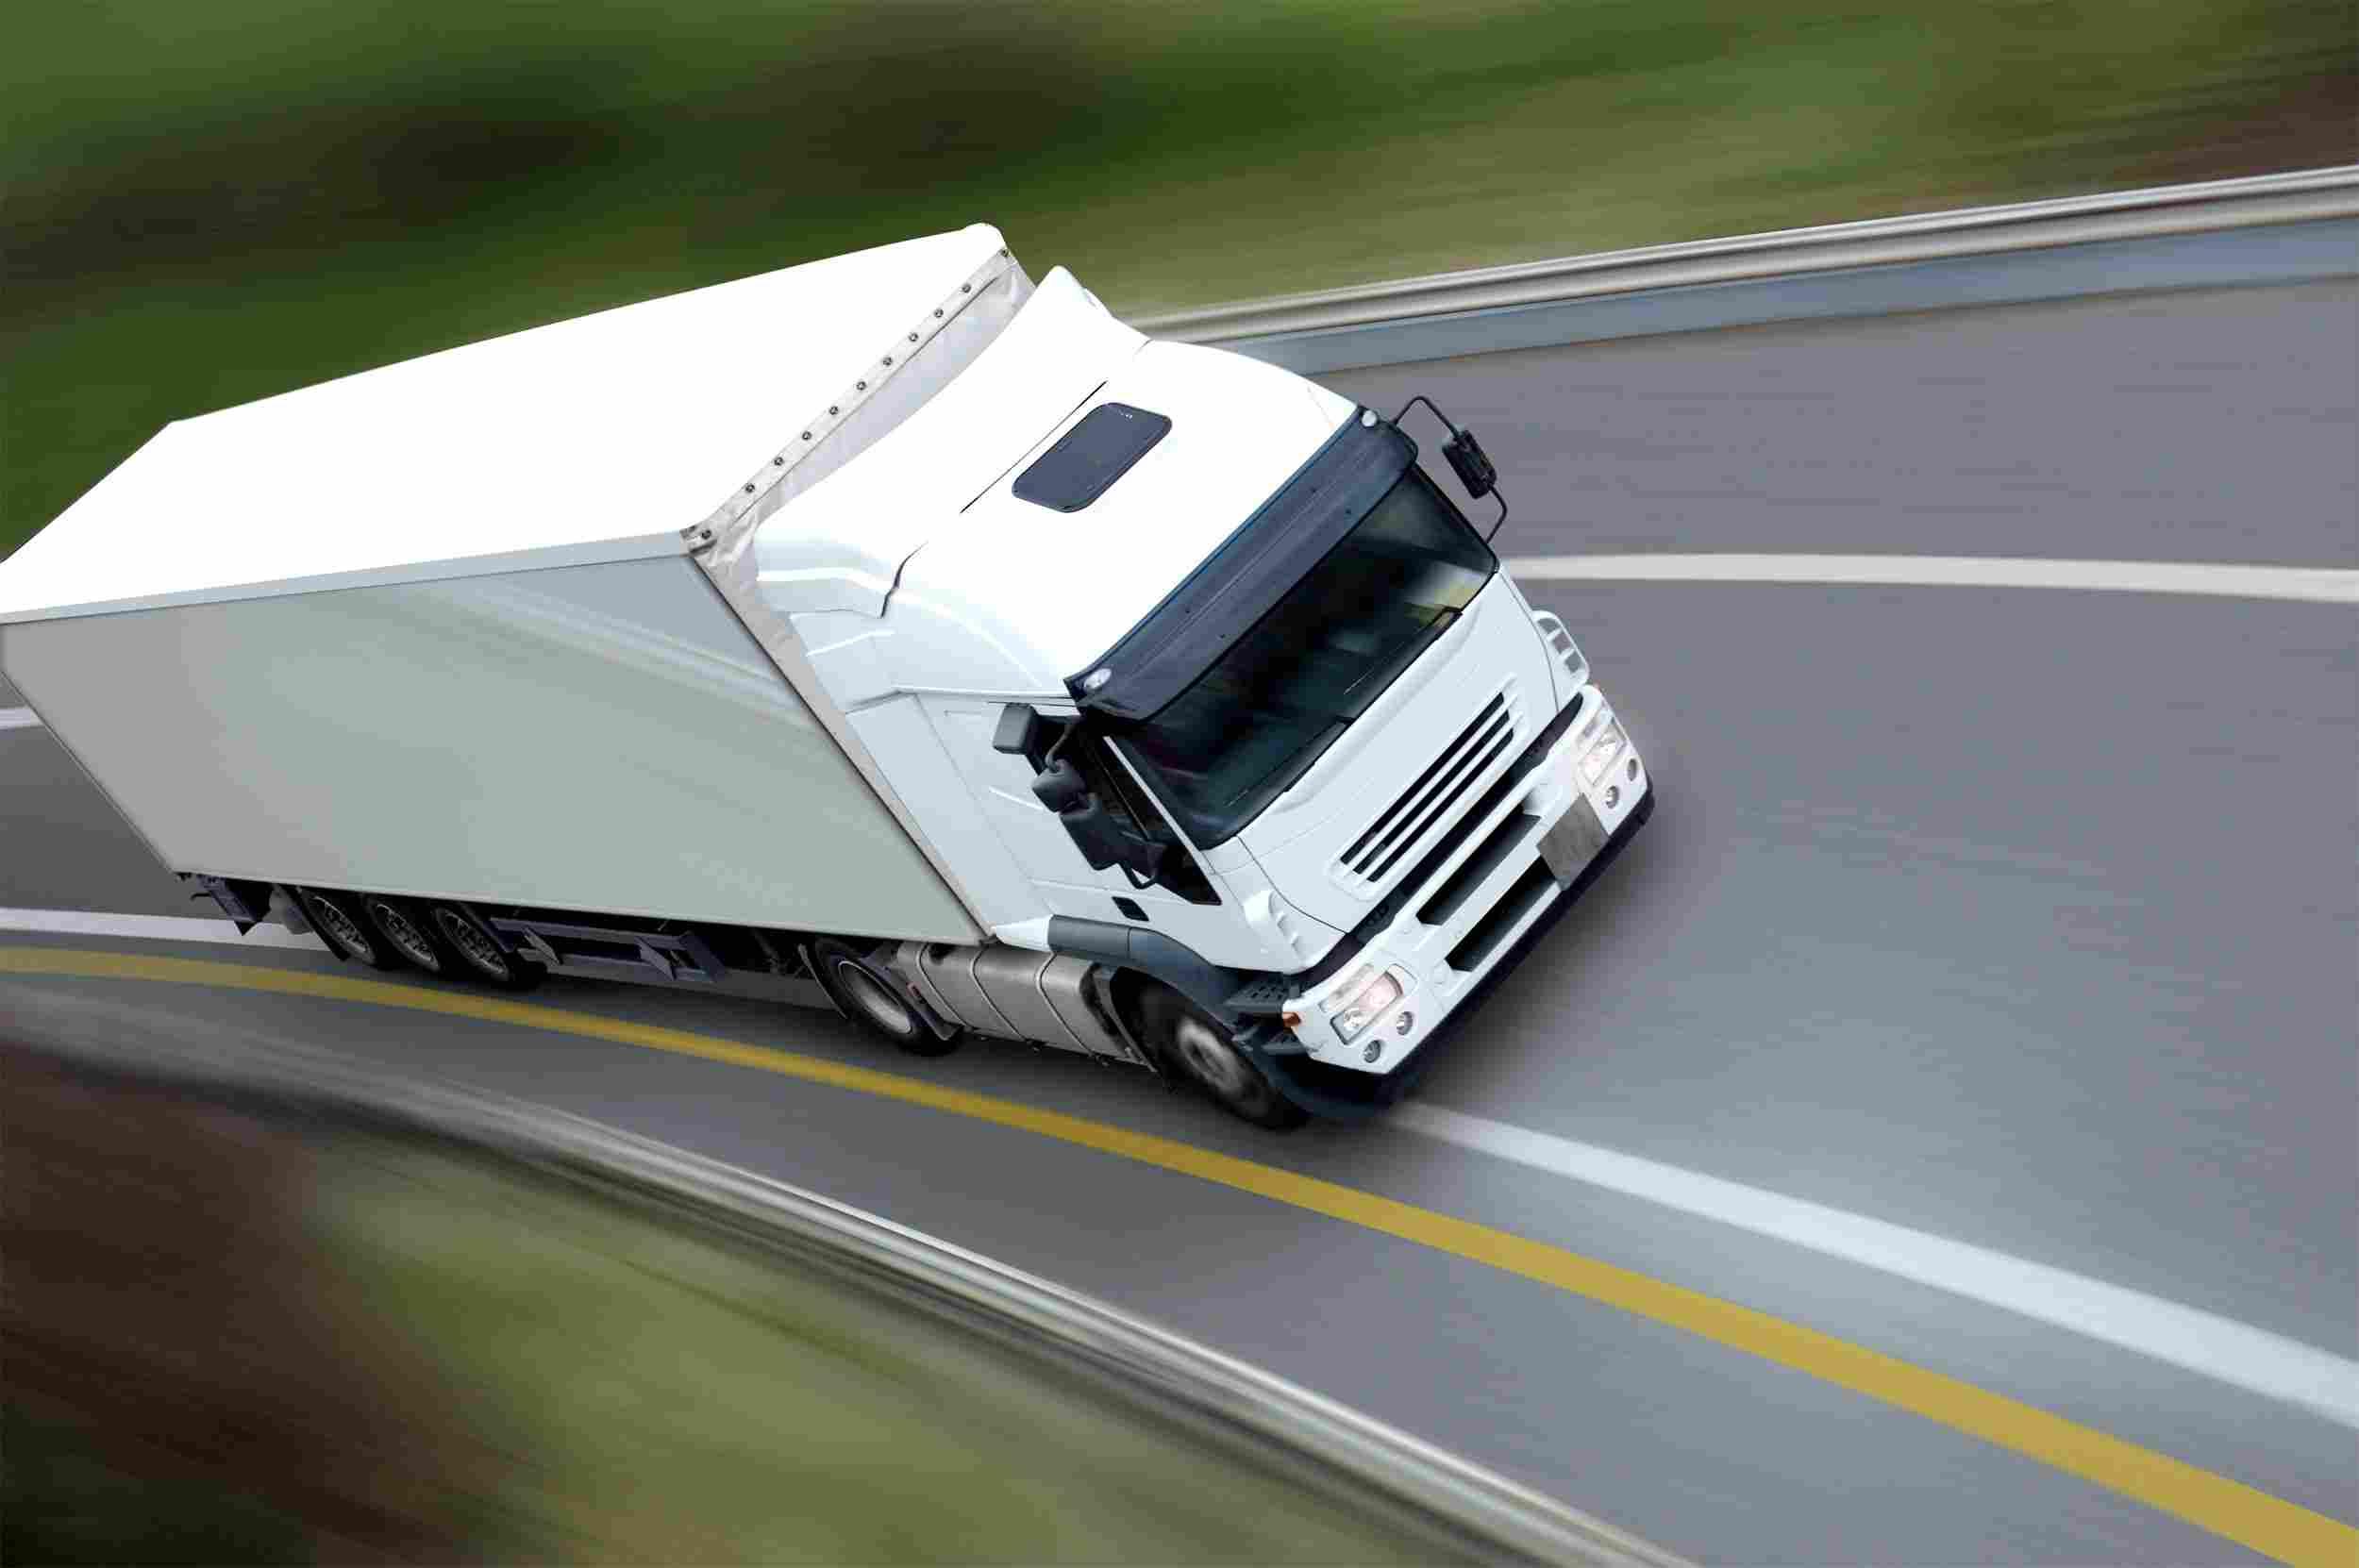 Disadvantages of Roadway Freight